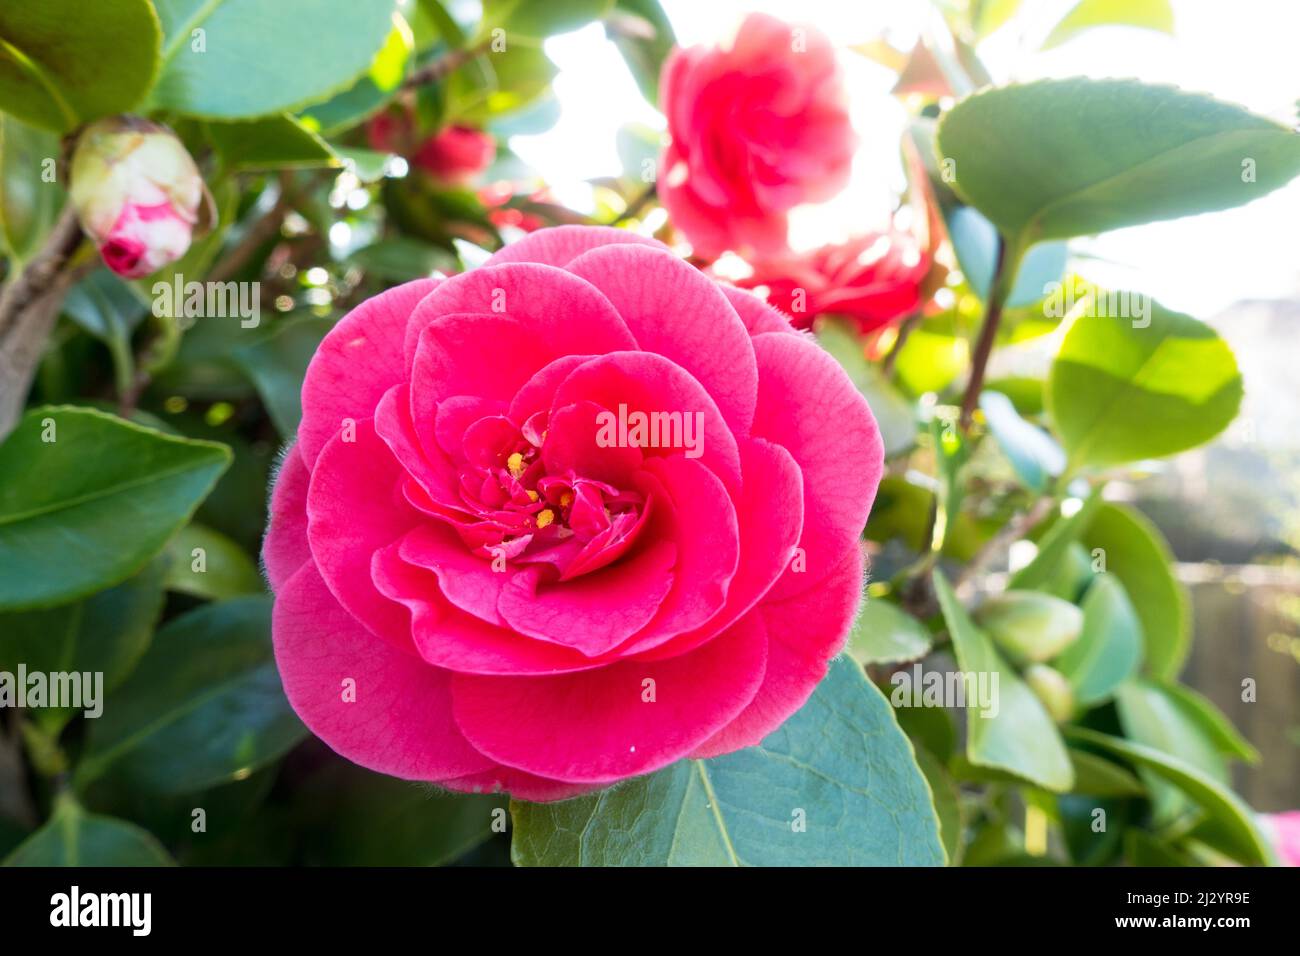 Camellia japonica or Common Camellia plant with full blossom flower Stock Photo